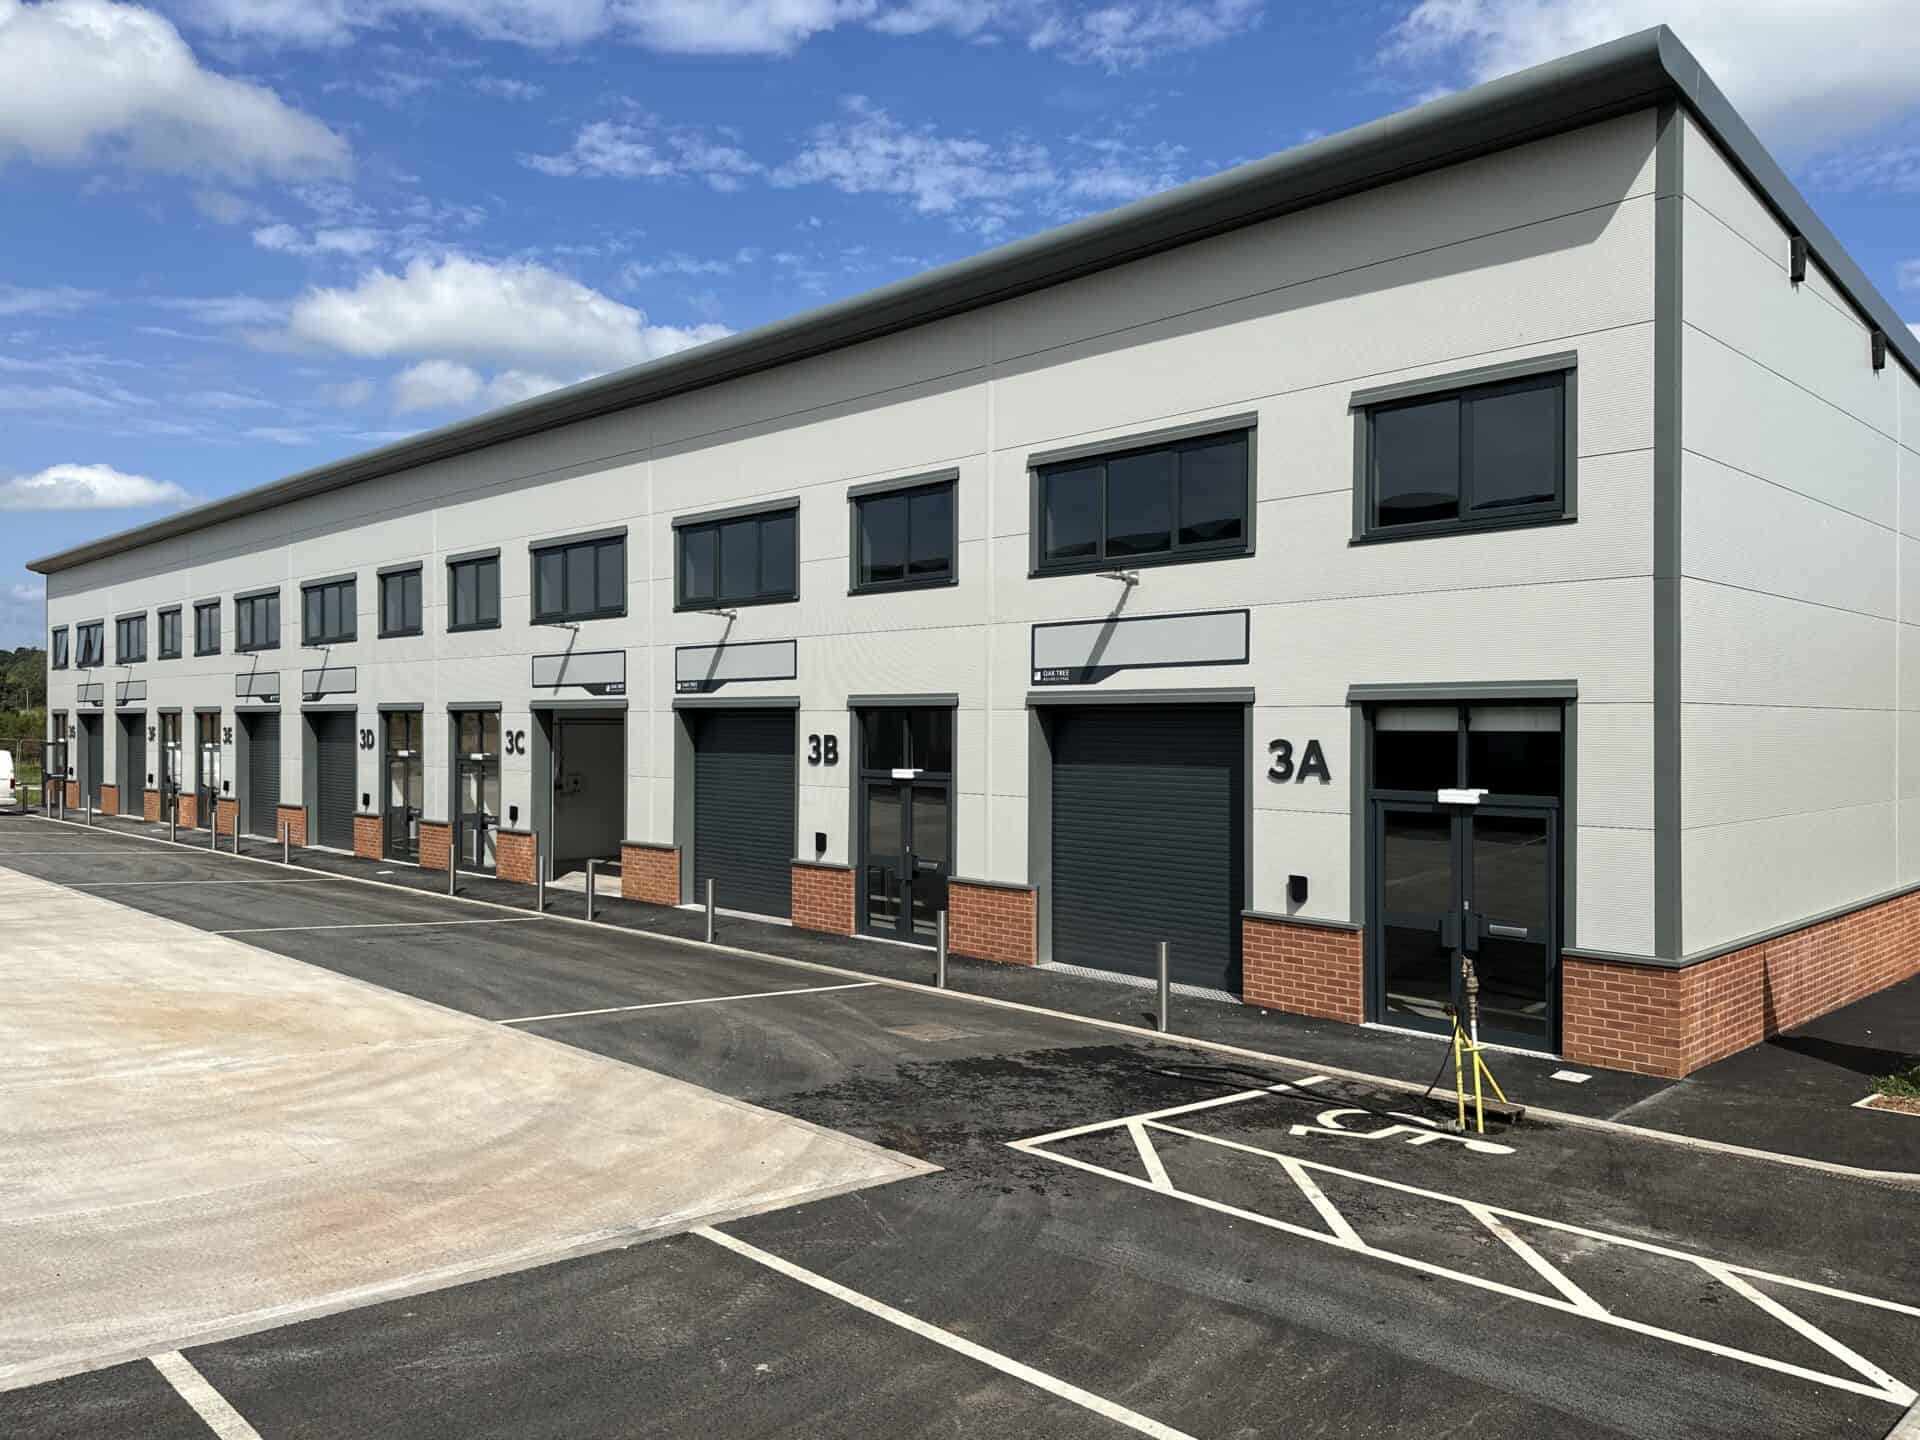 Exterior view of a row of units at Oak Tree, Kingskerswell, showcasing the flexible and multifunctional commercial spaces in this location.